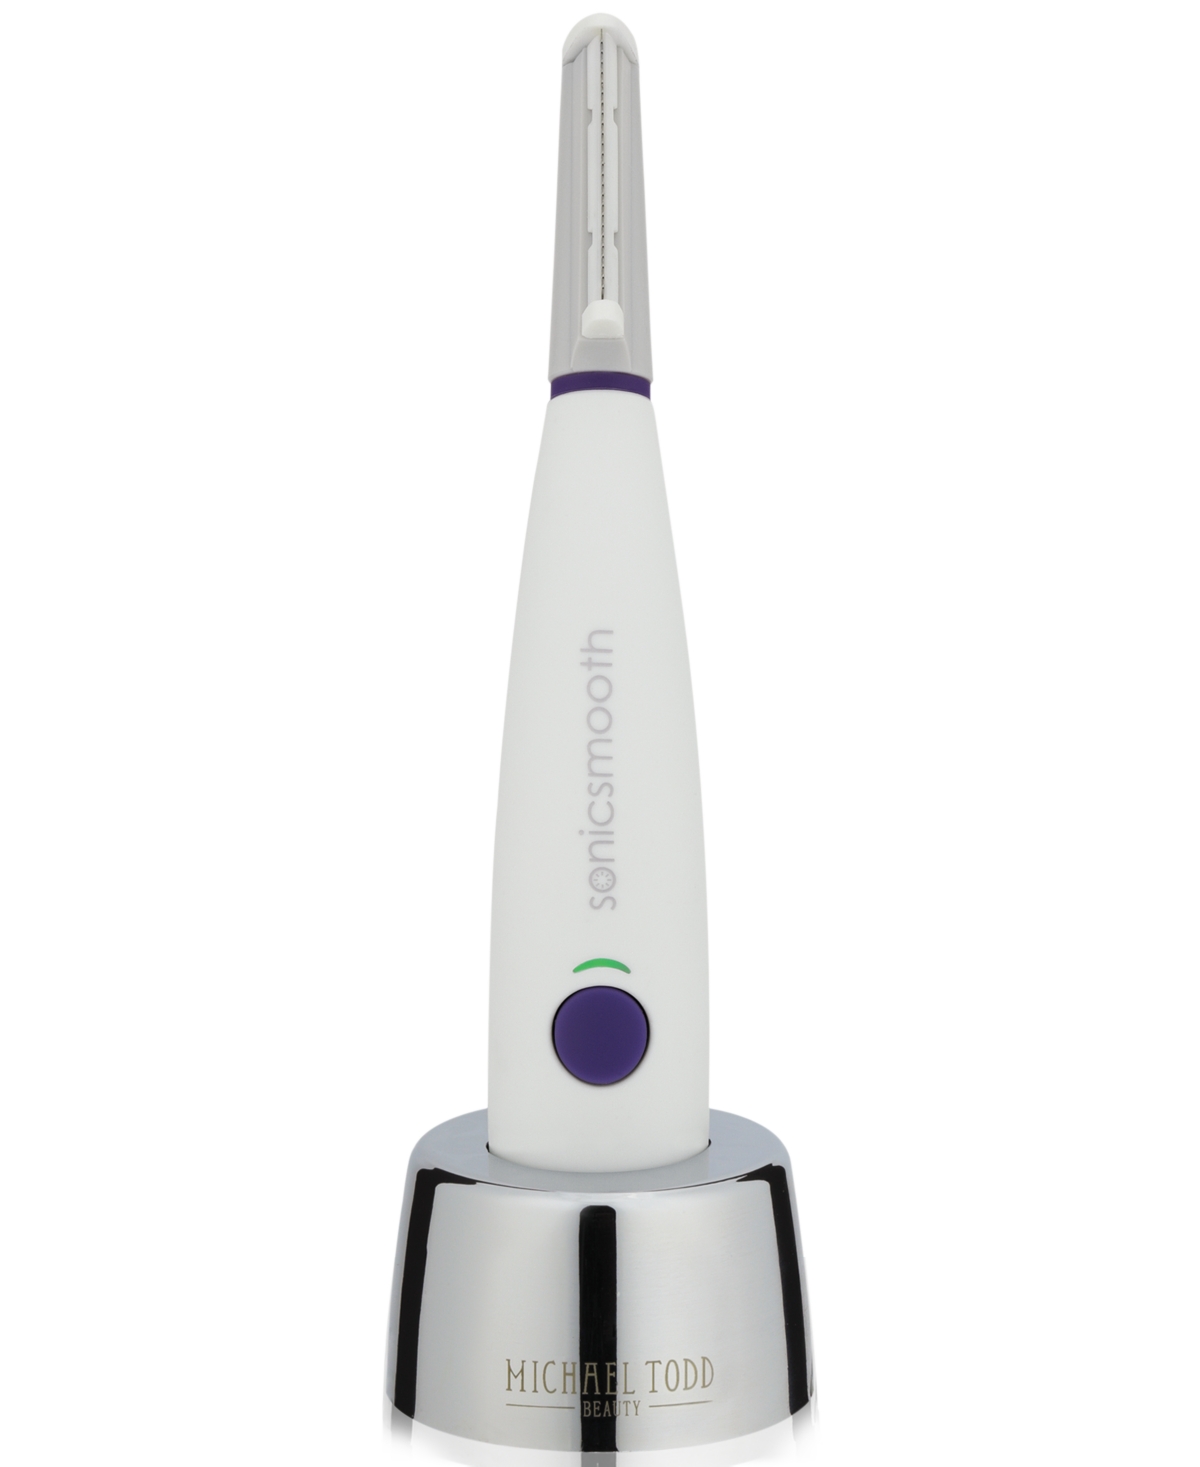 Sonicsmooth Sonic Dermaplaning 2 In 1 Facial Exfoliation & Peach Fuzz Hair Removal System - Pearl White